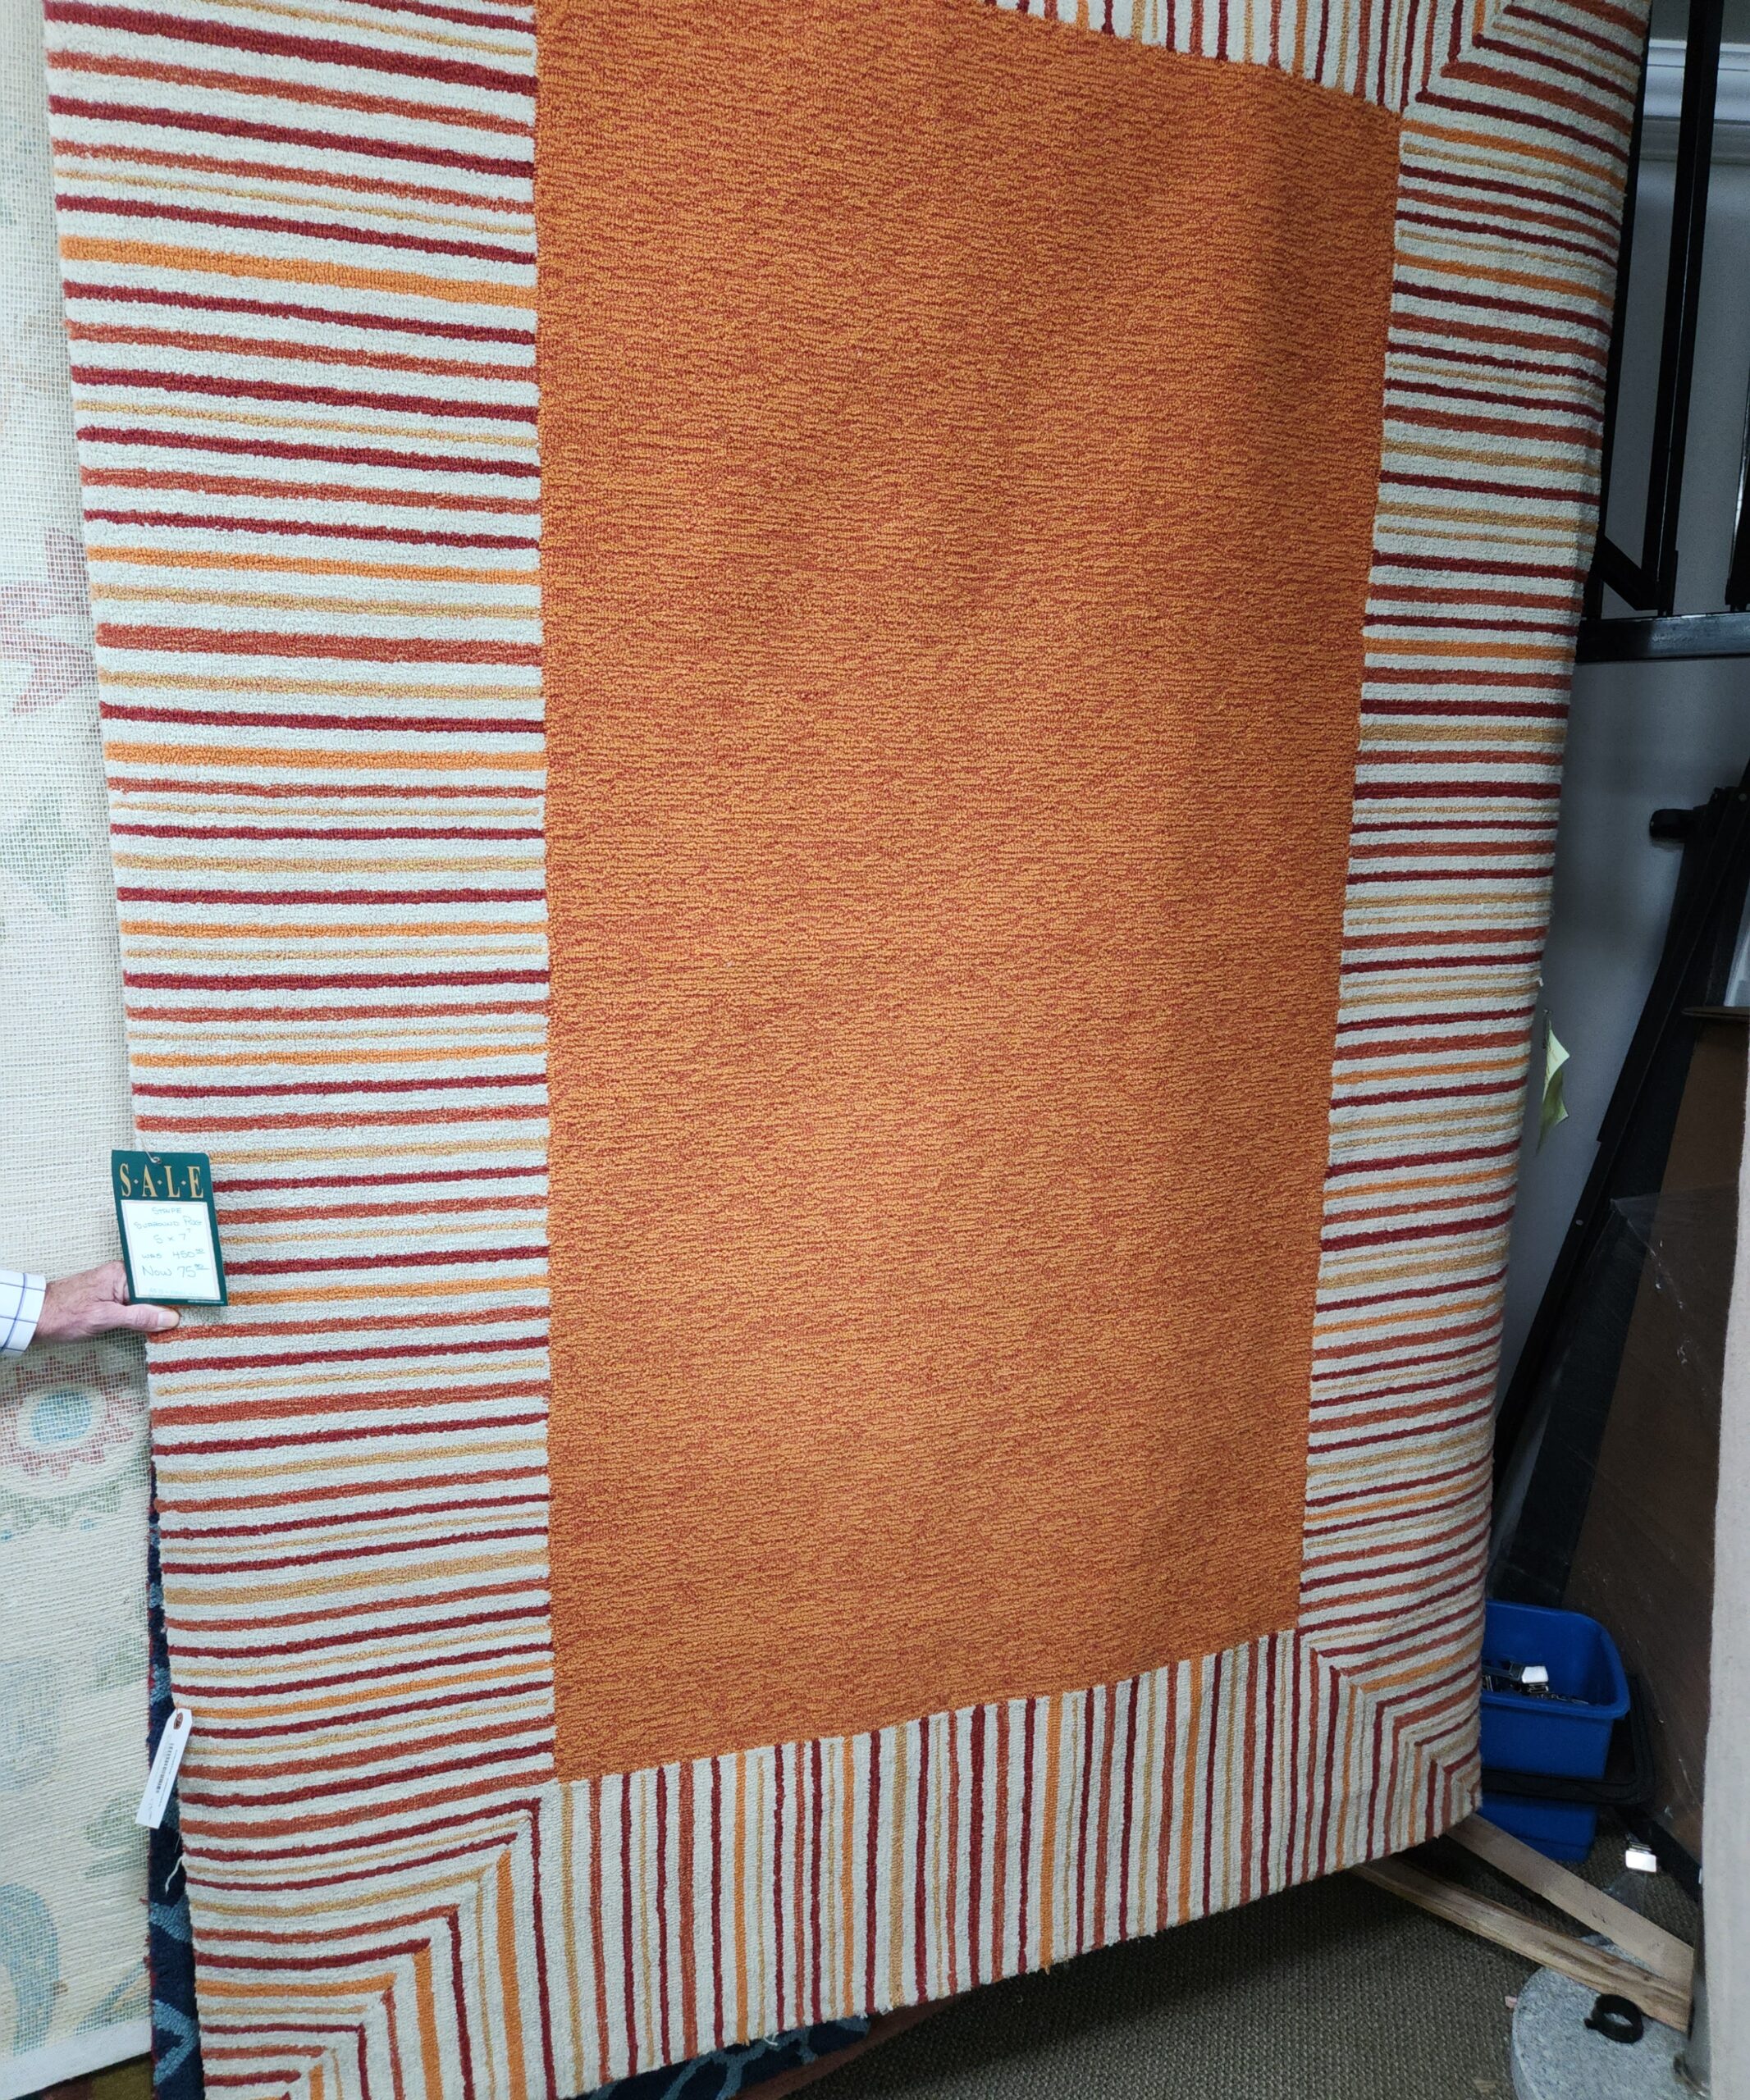 an orange and white striped blanket on top of a bed